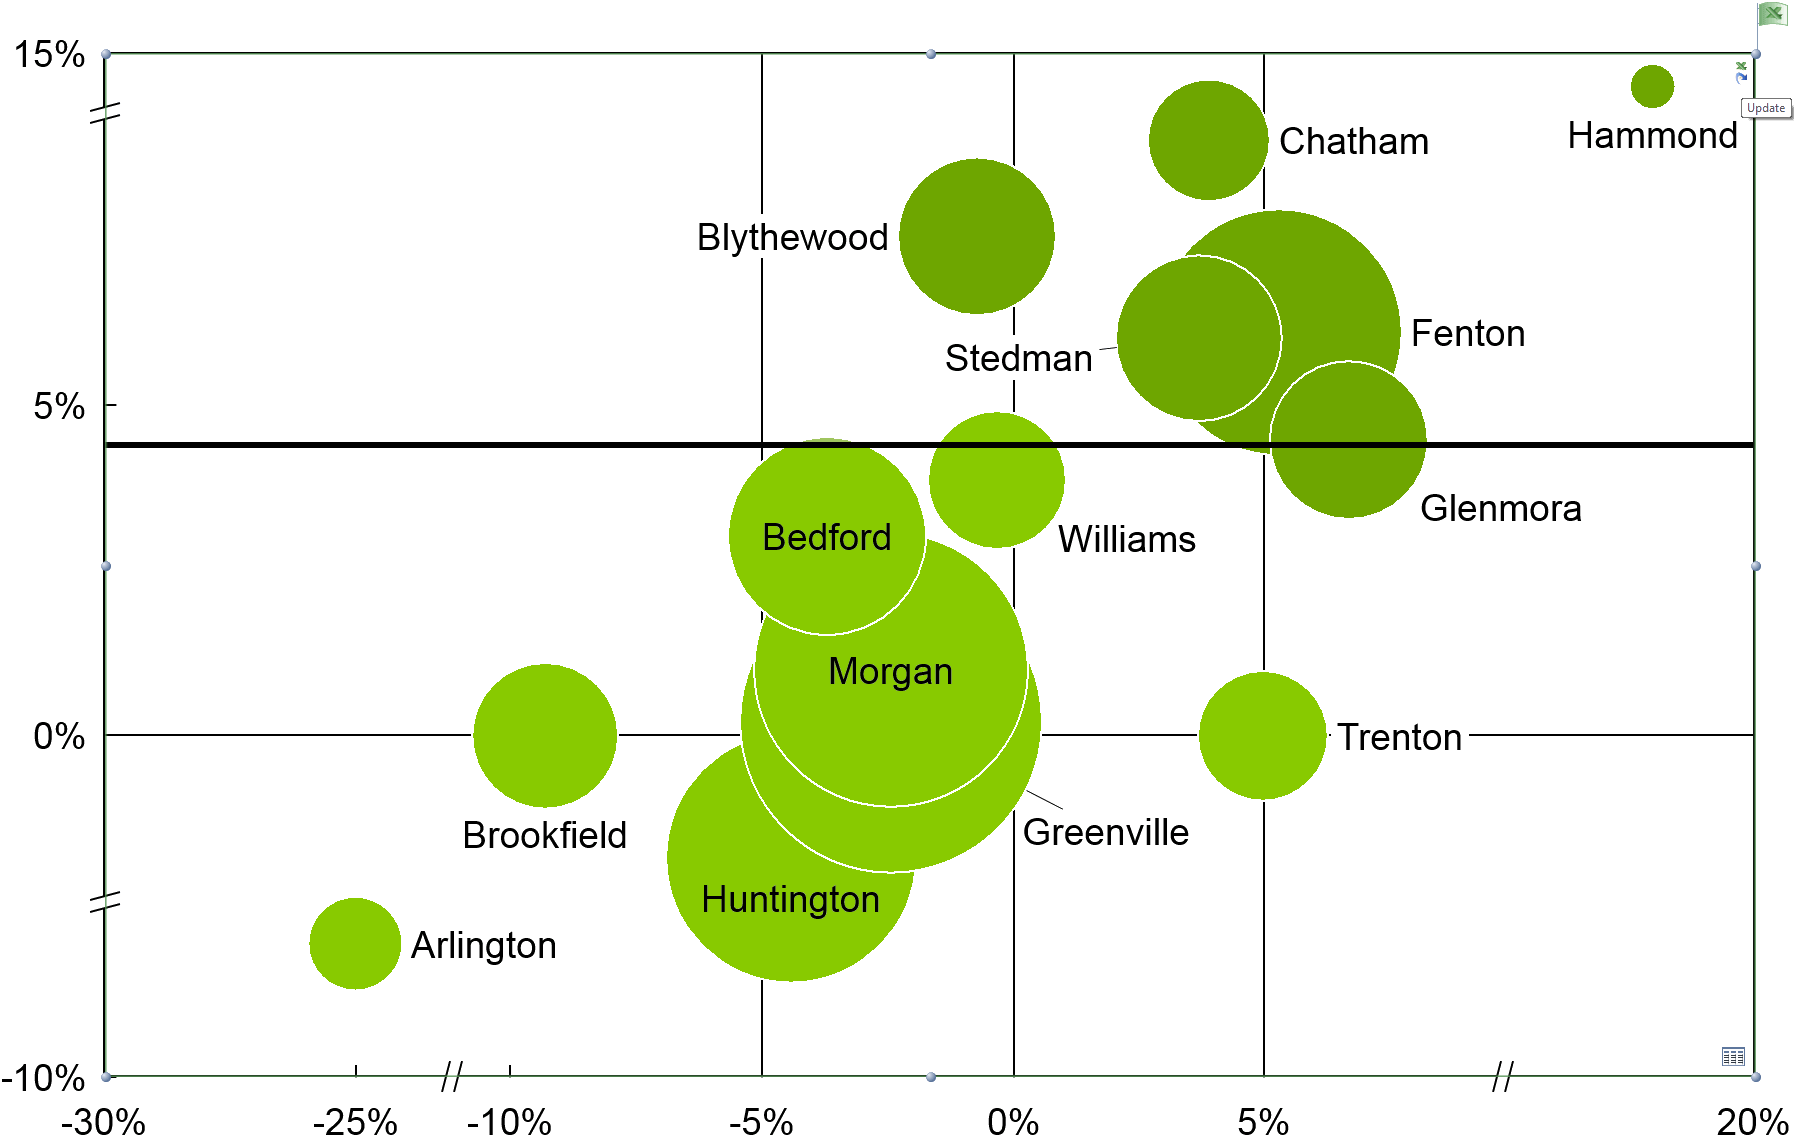 Bubble chart linked to Excel data